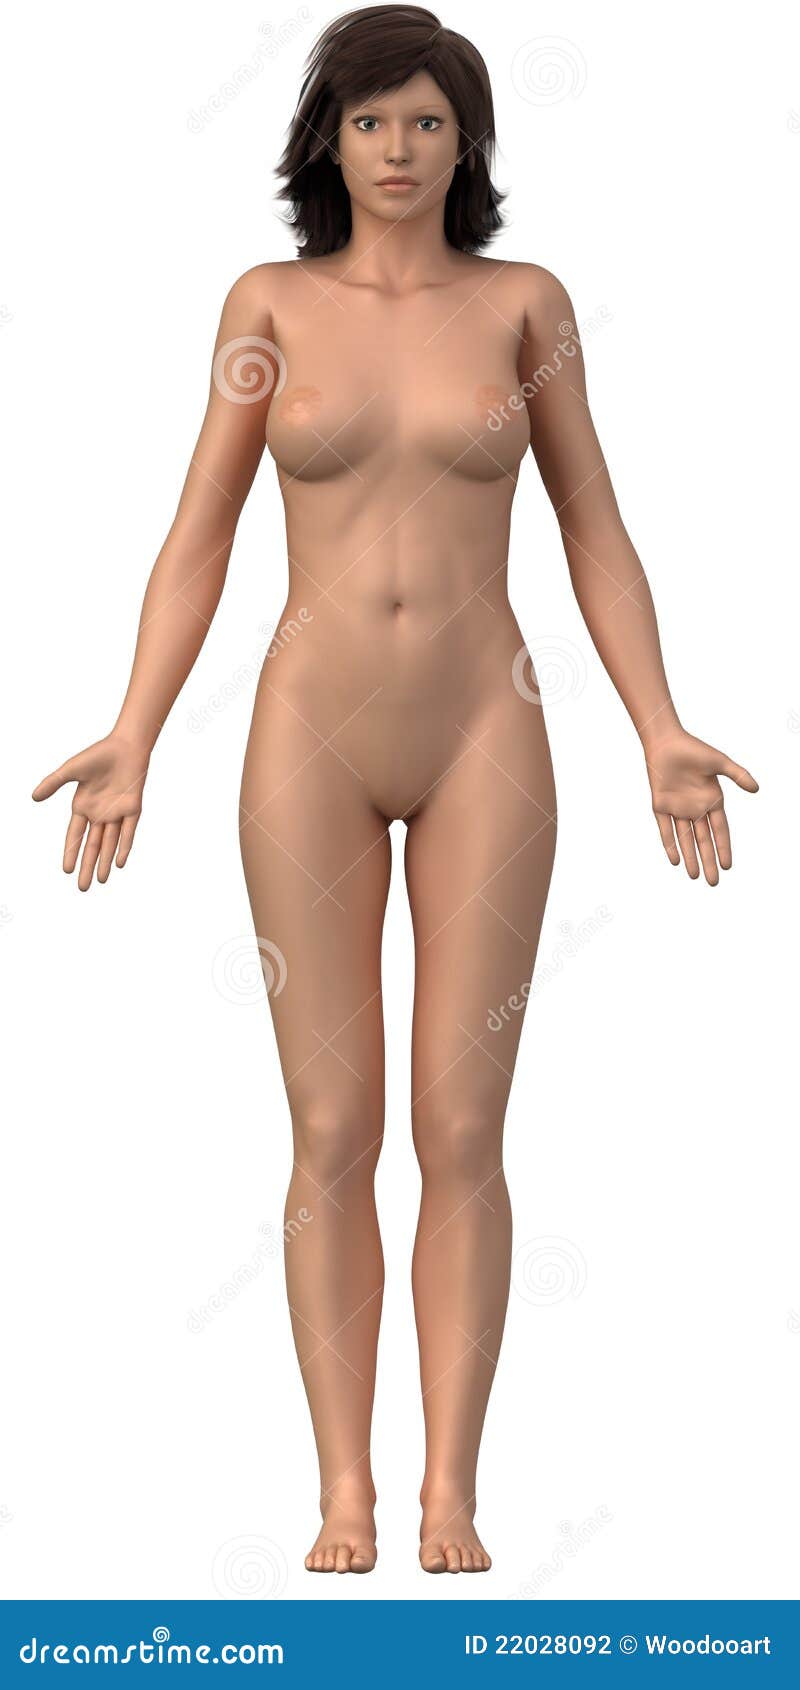 What does a naked woman look like